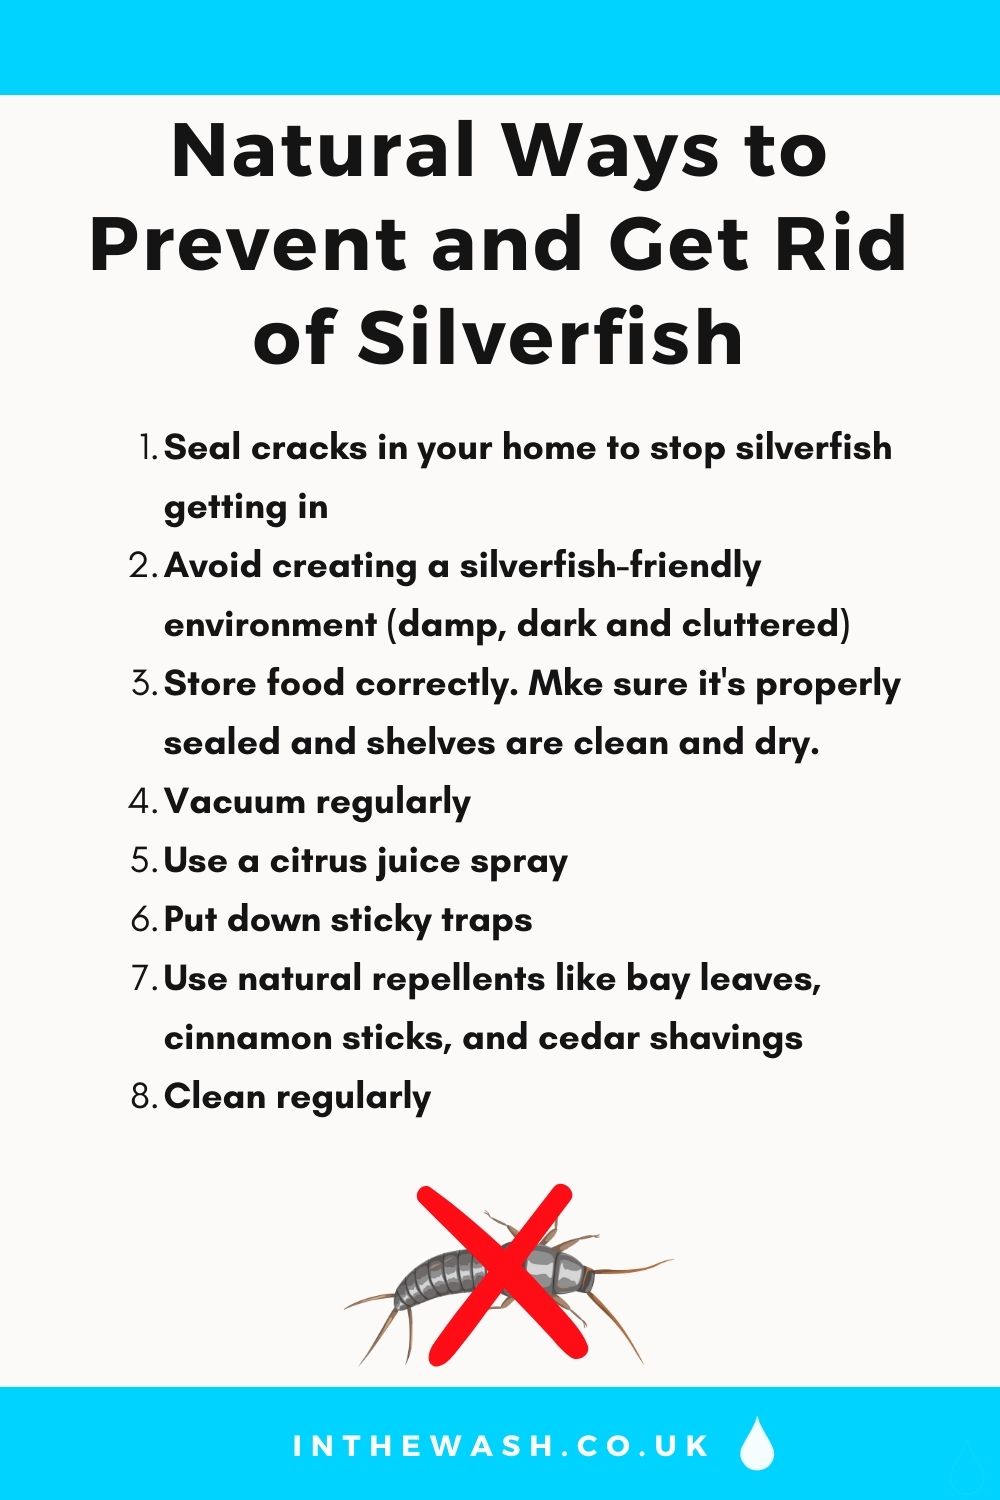 Natural ways to prevent and get rid of silverfish